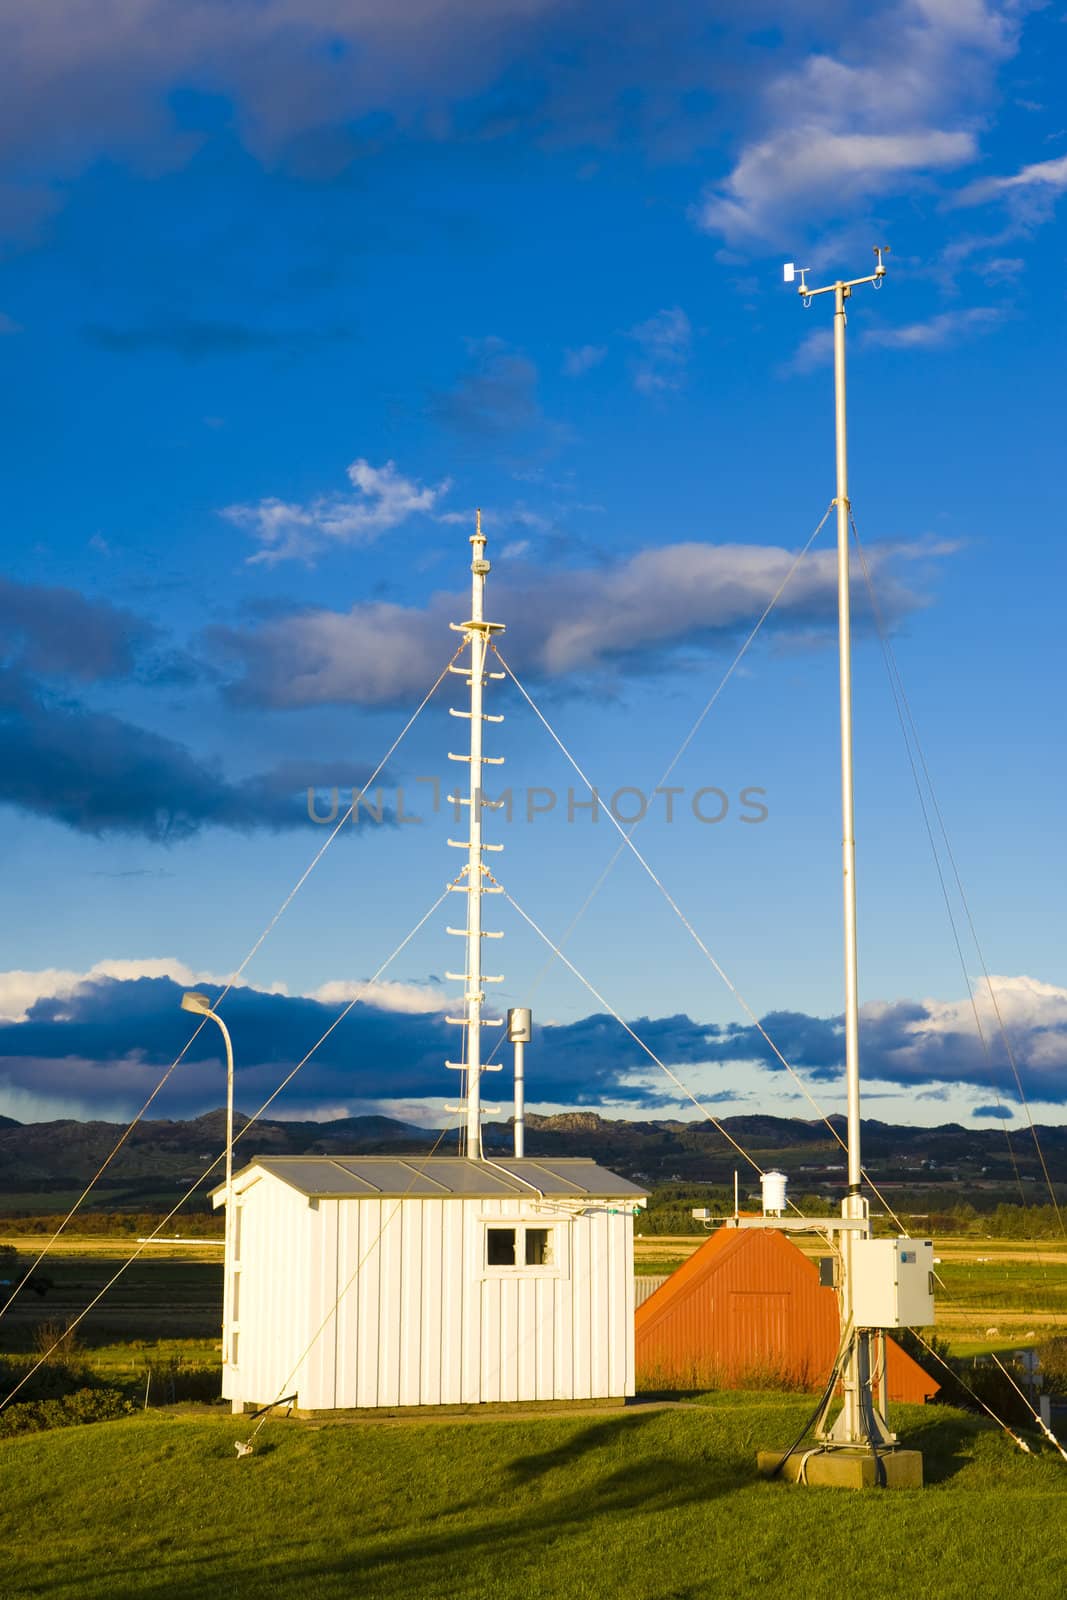 meteorologic station, Lista, Norway by phbcz